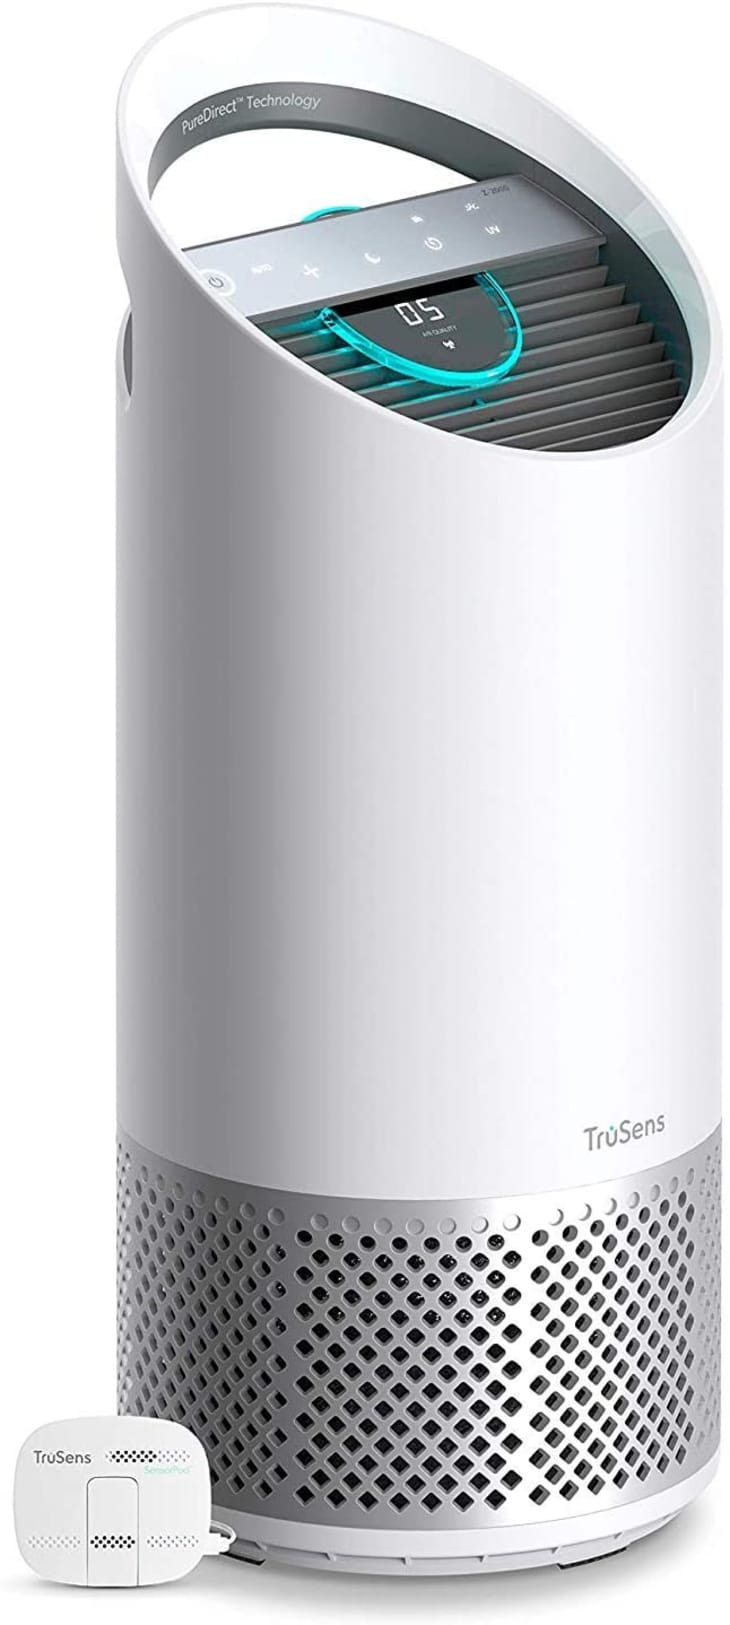 Best Air Purifiers 2020 - Top Rated Purifiers for ...